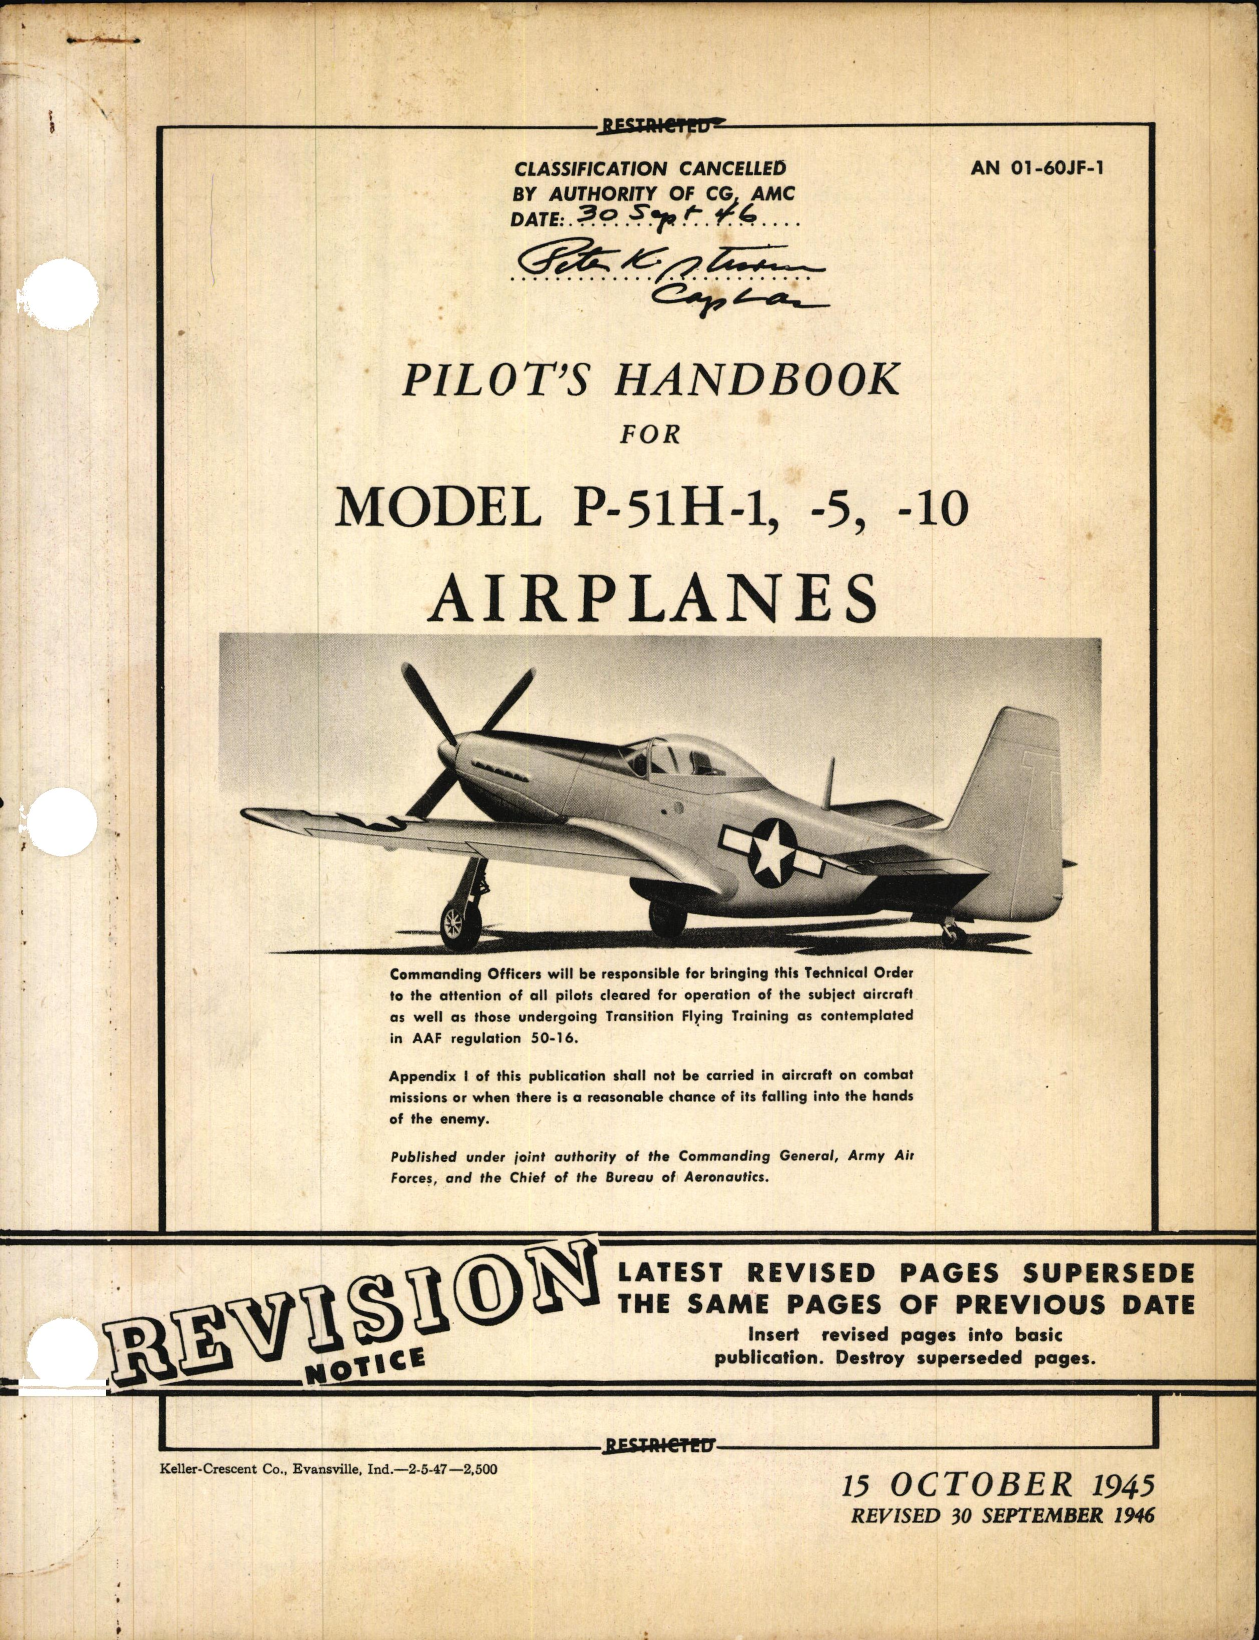 Sample page 1 from AirCorps Library document: Pilot's Handbook for P-51H-1, -5, and -10